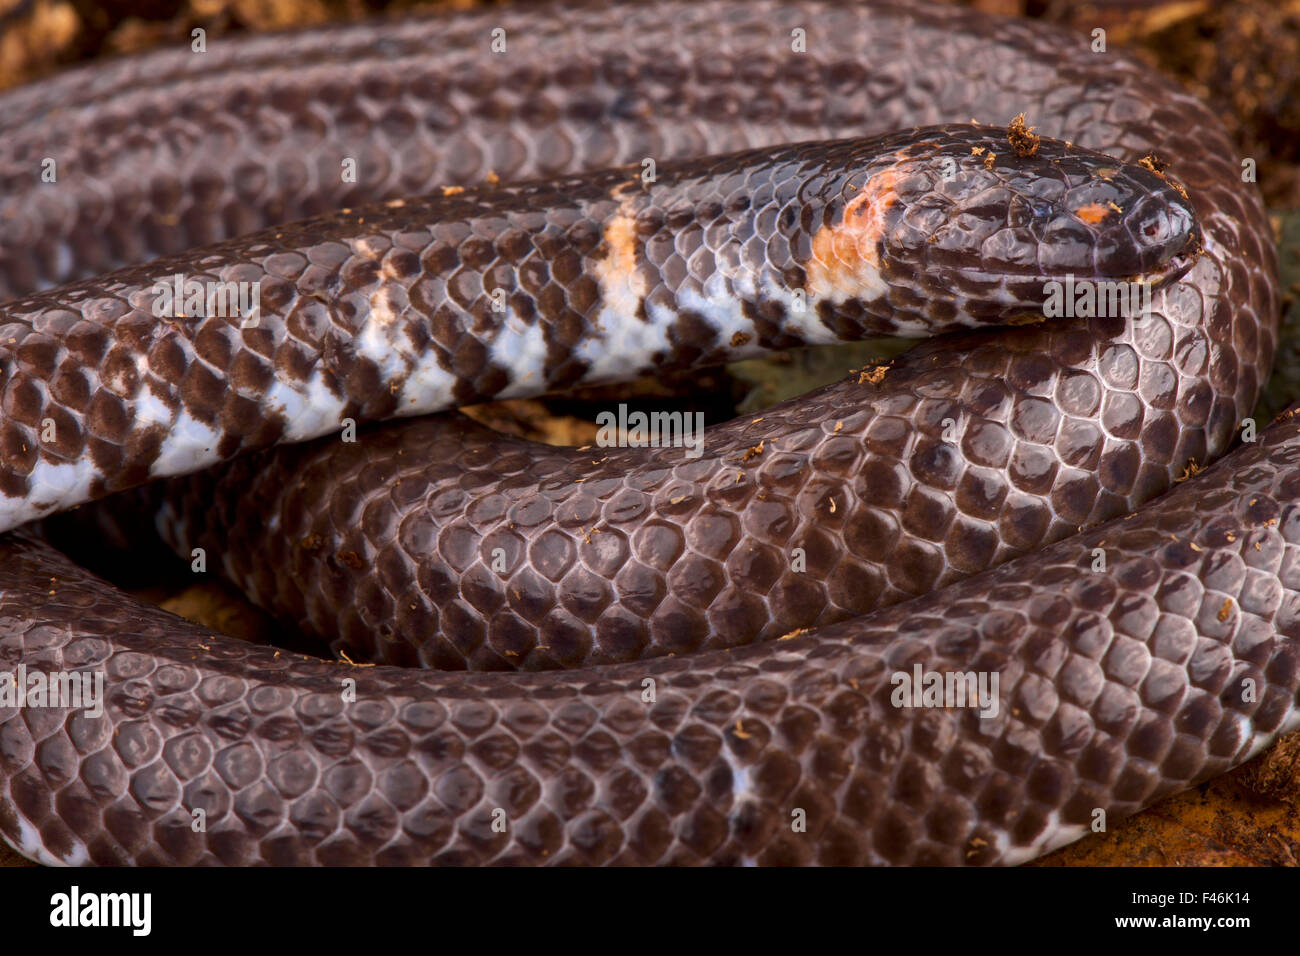 Pipe snake (Cylinddophis rufus) Stock Photo